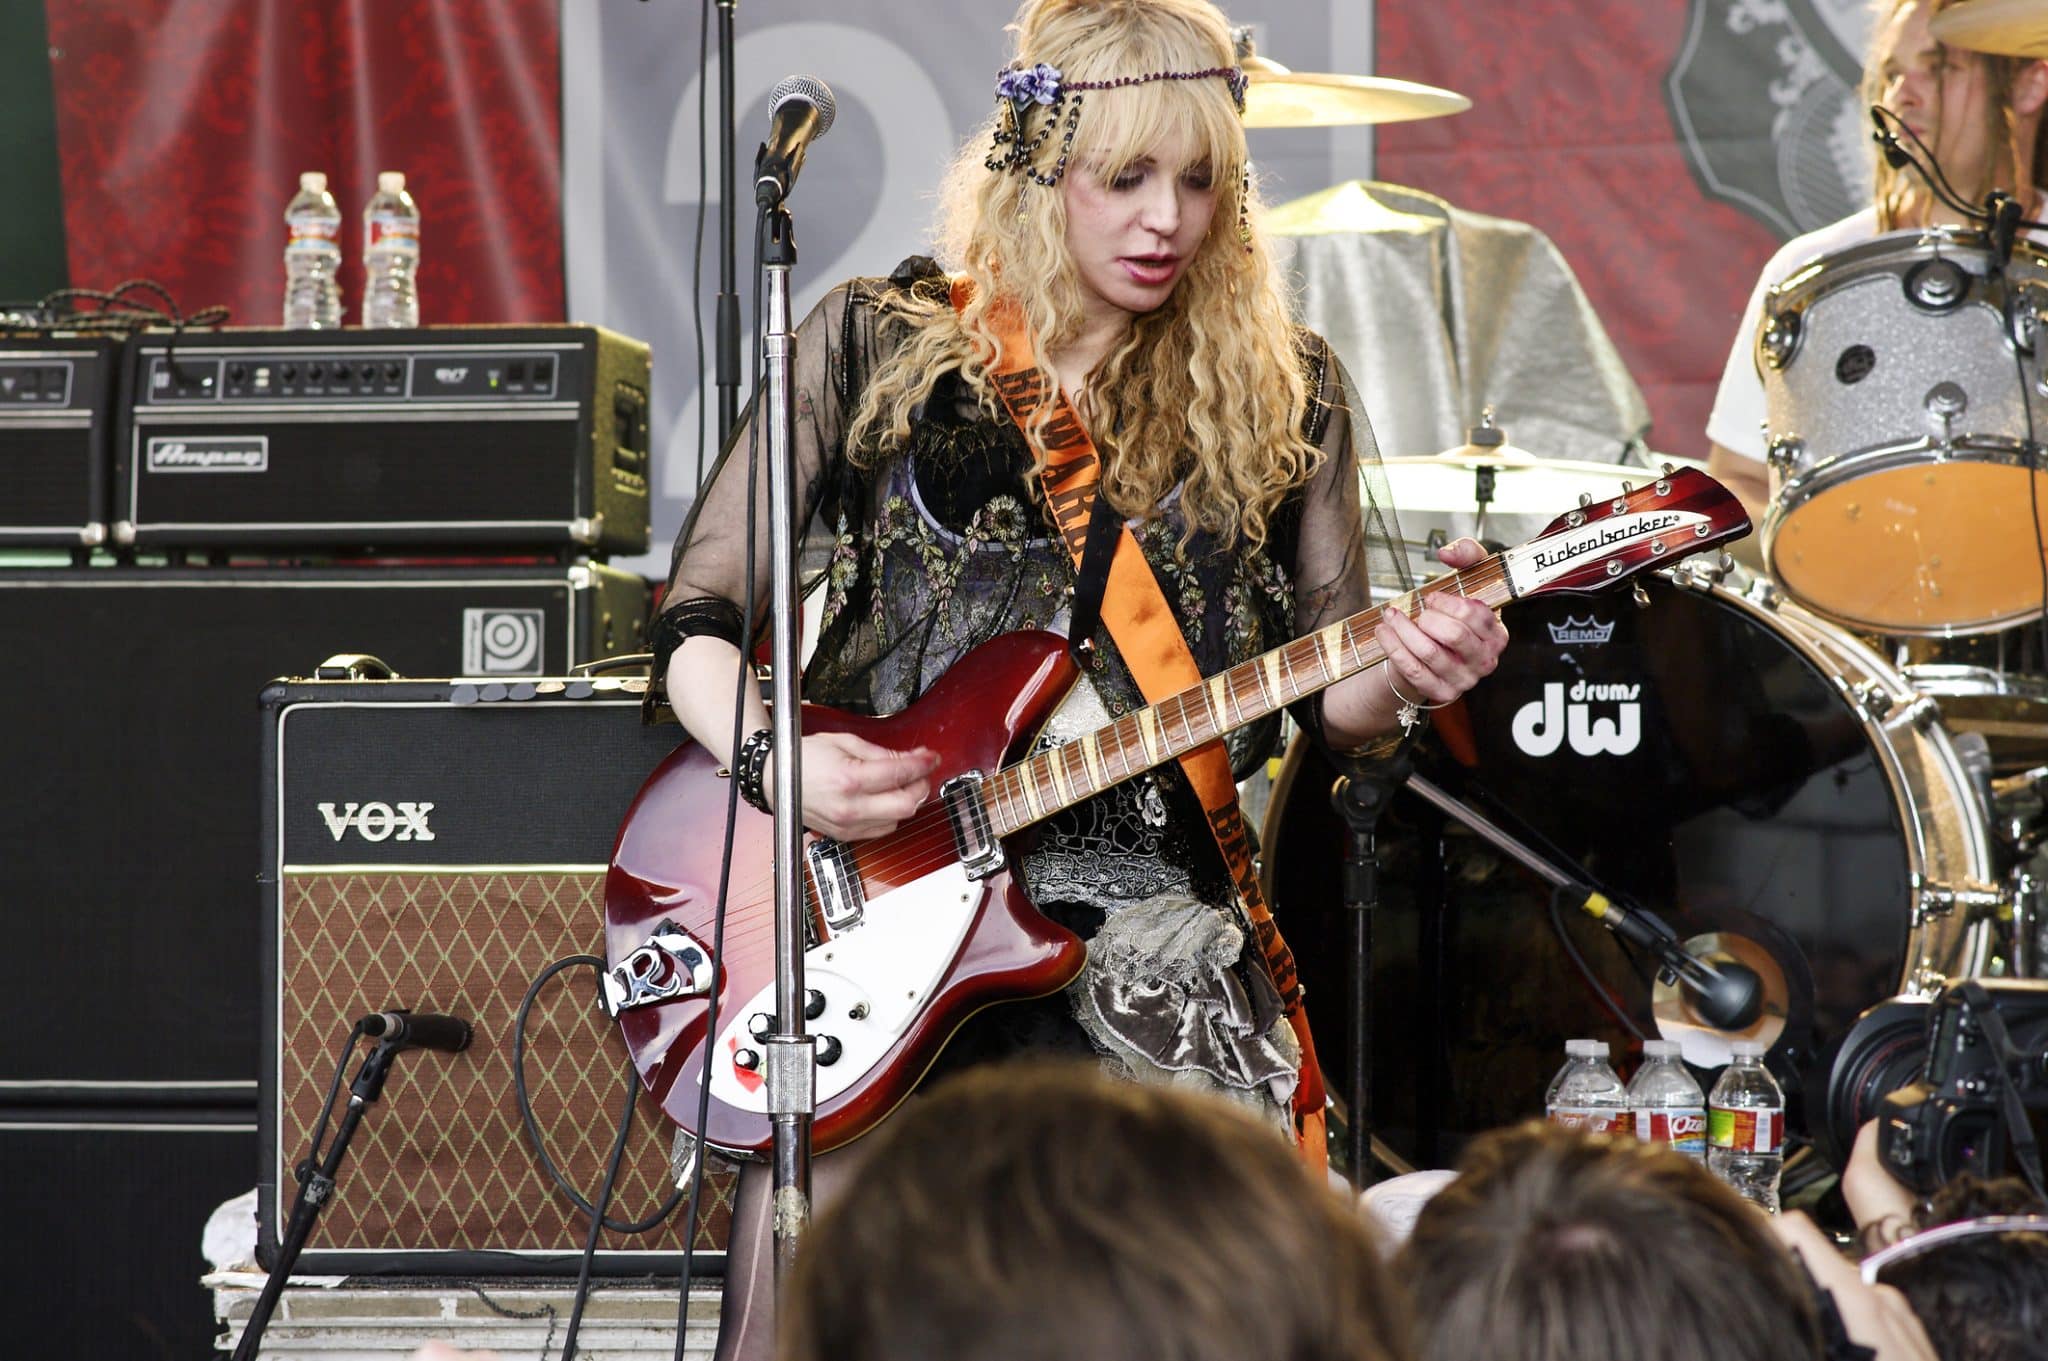 Courtney Love sparks controversy with comments on Taylor Swift, Beyoncé, Lana Del Rey